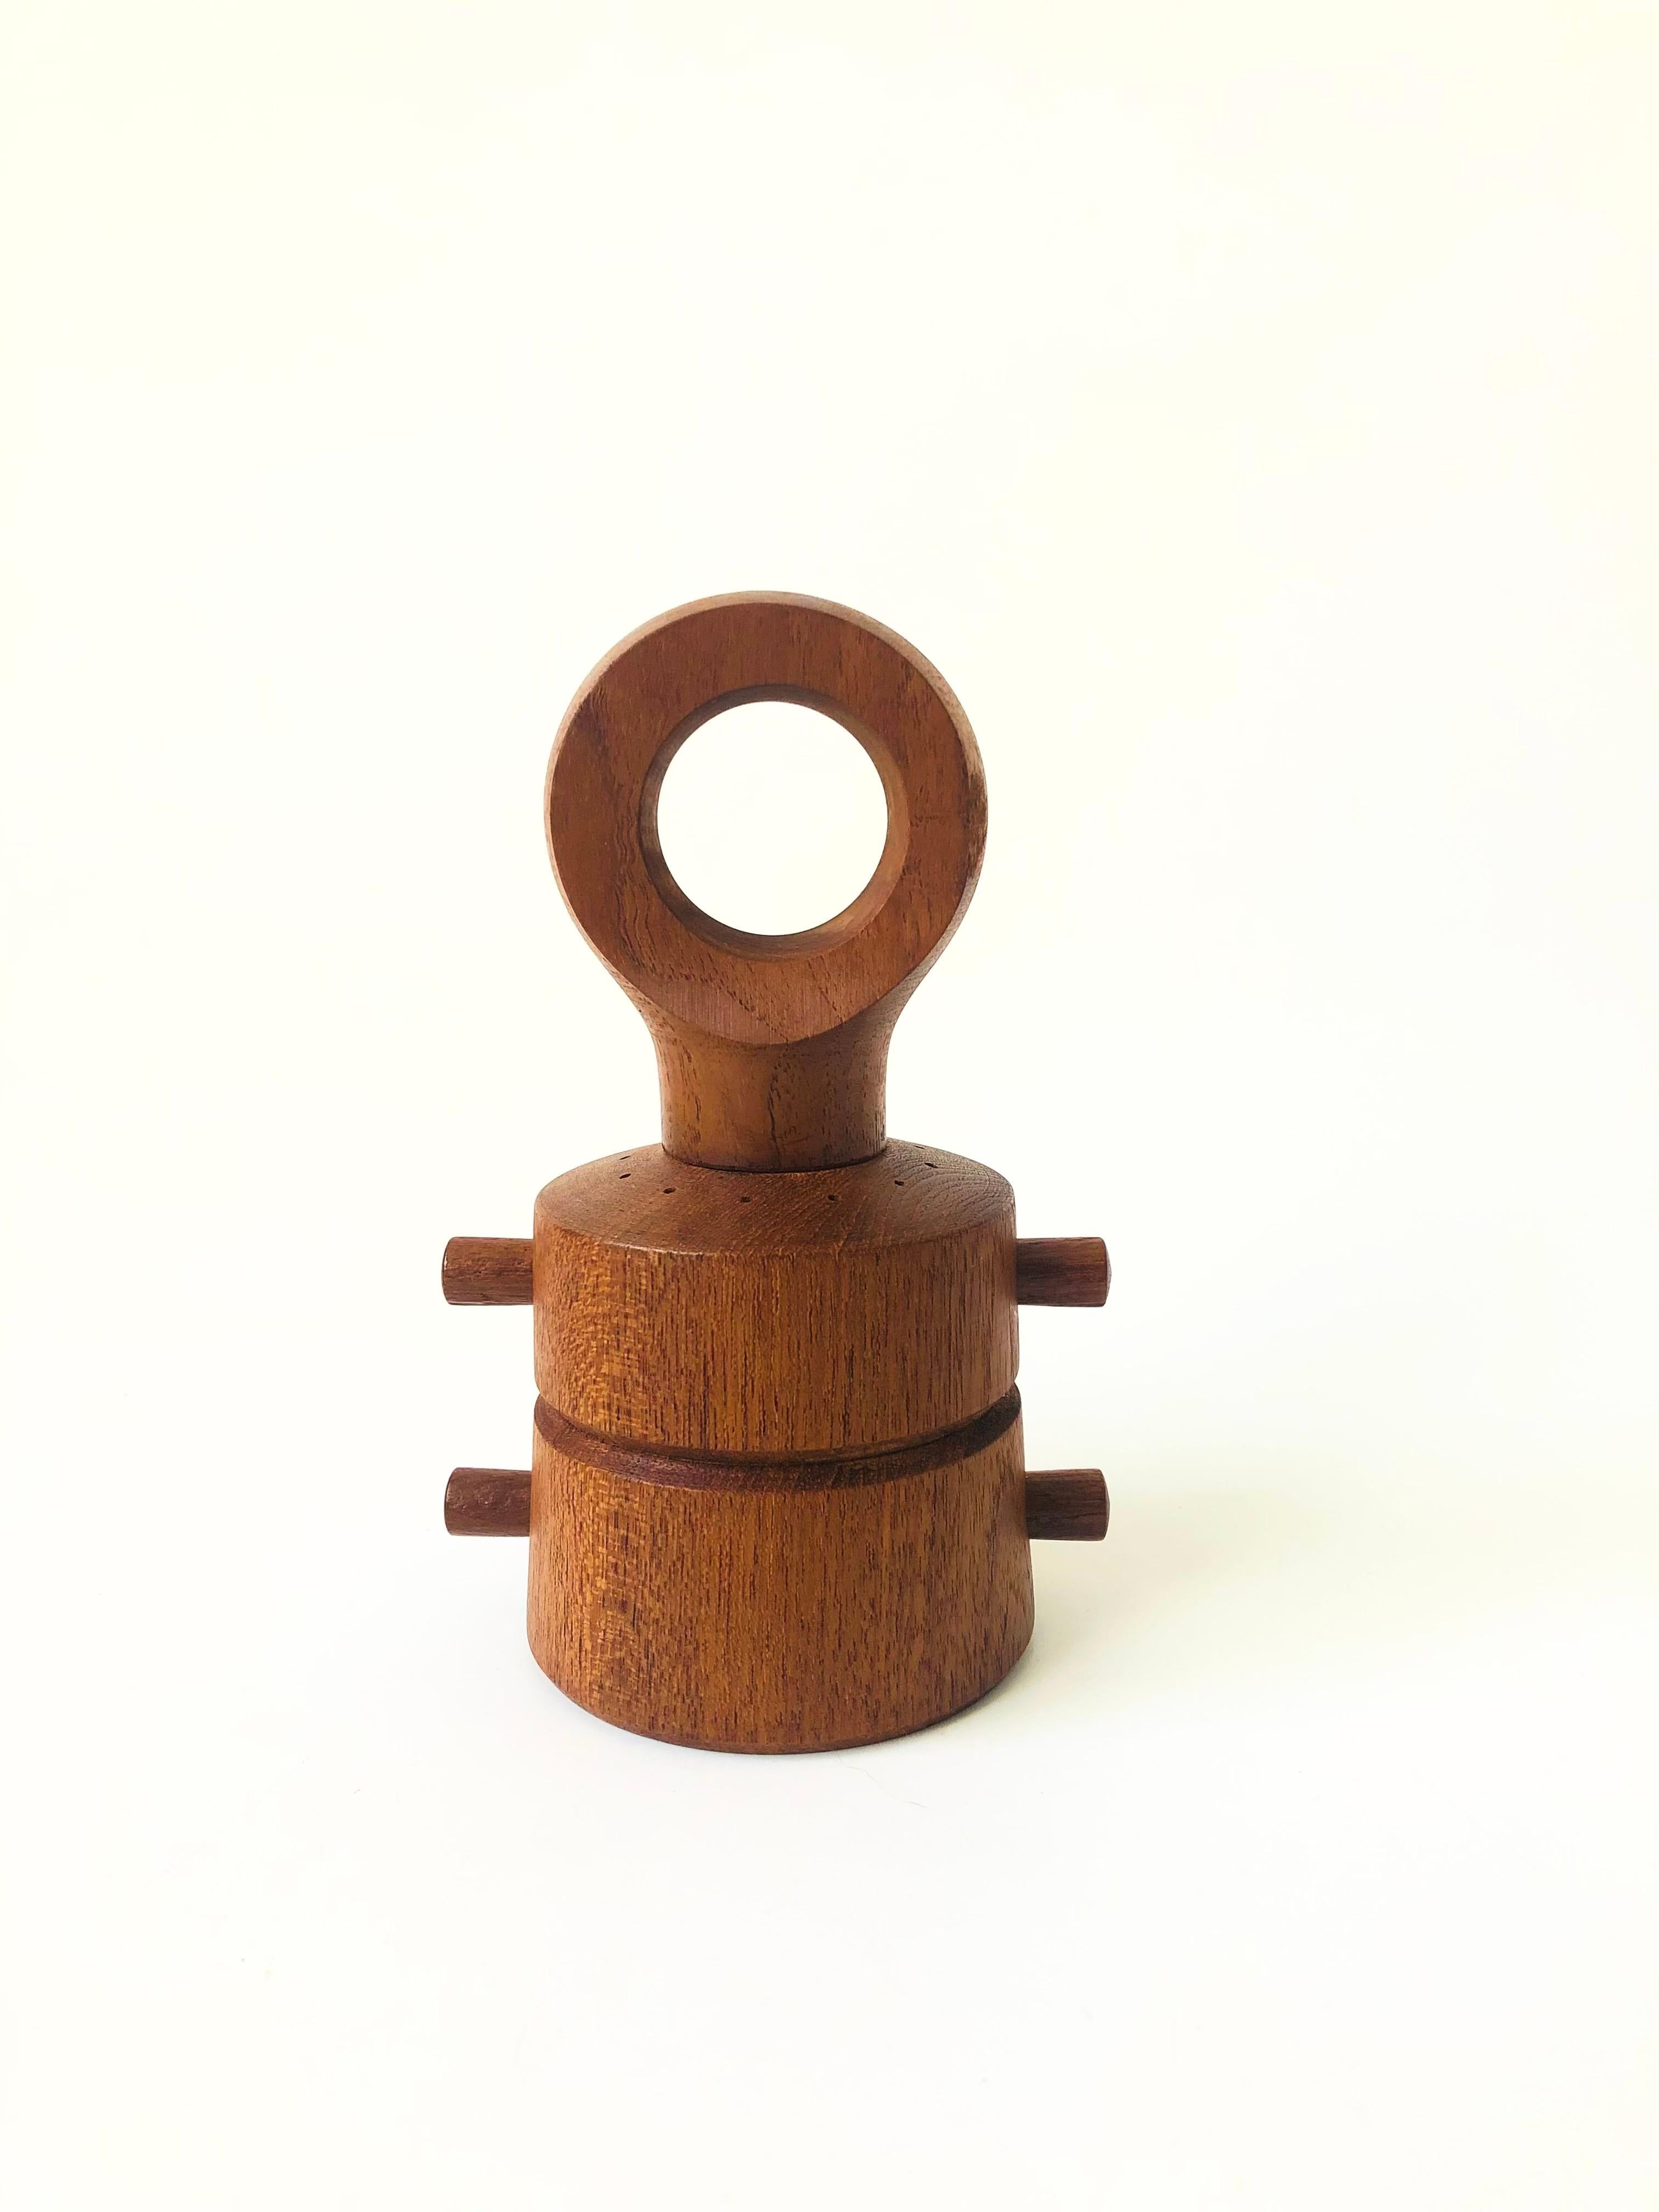 A mid century teak pepper mill and salt shaker combo designed by Jens Quistgaard for Dansk. Beautifully designed, 